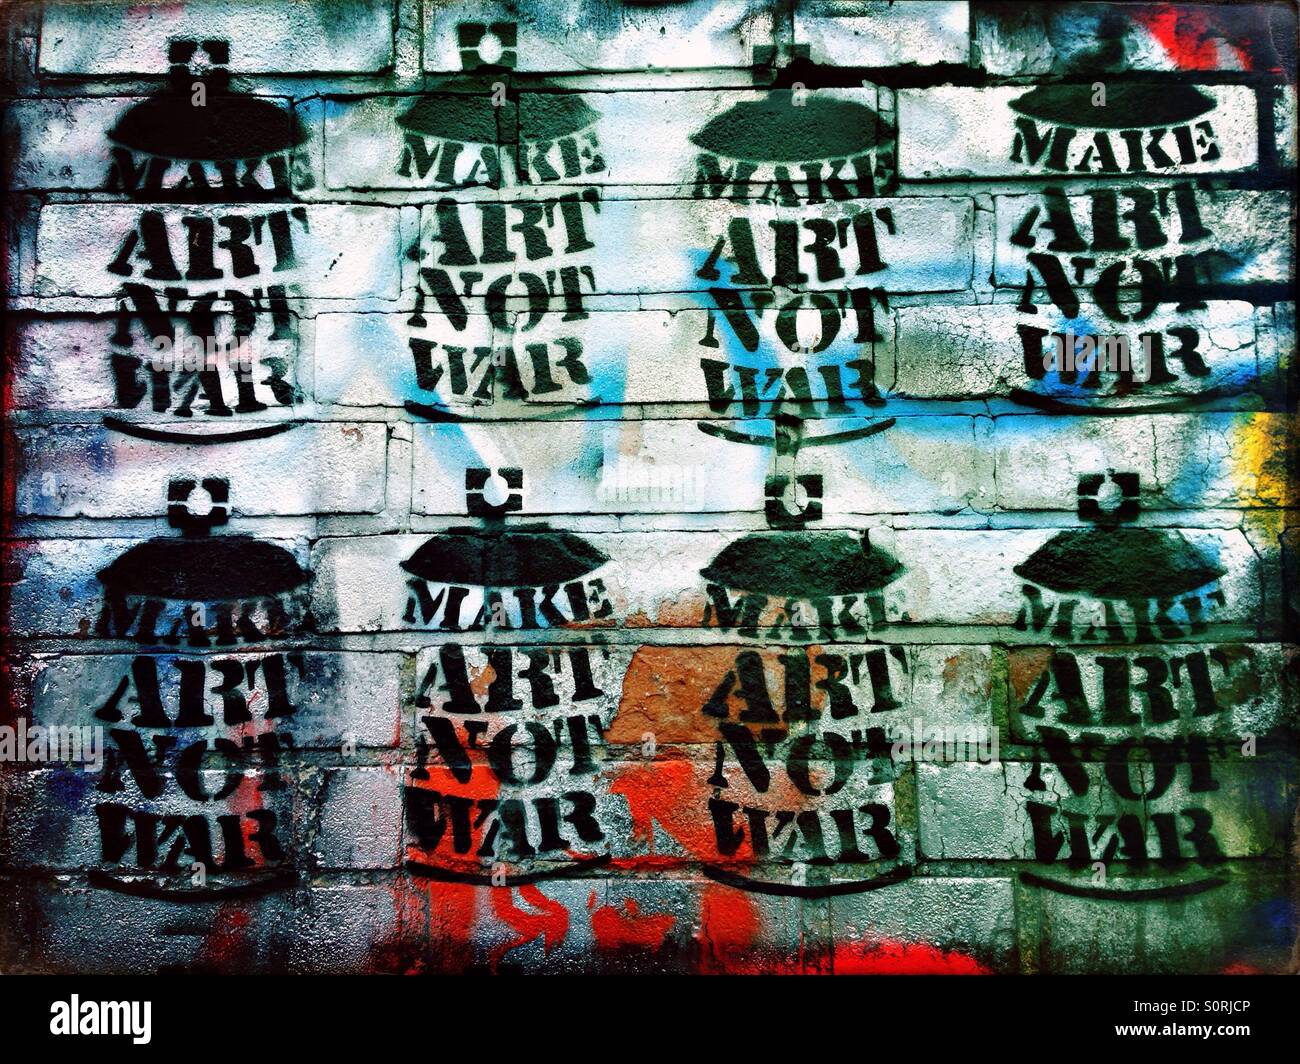 A stencil graffiti with the slogan 'make art not war' on a brick wall in Berlin, Germany Stock Photo